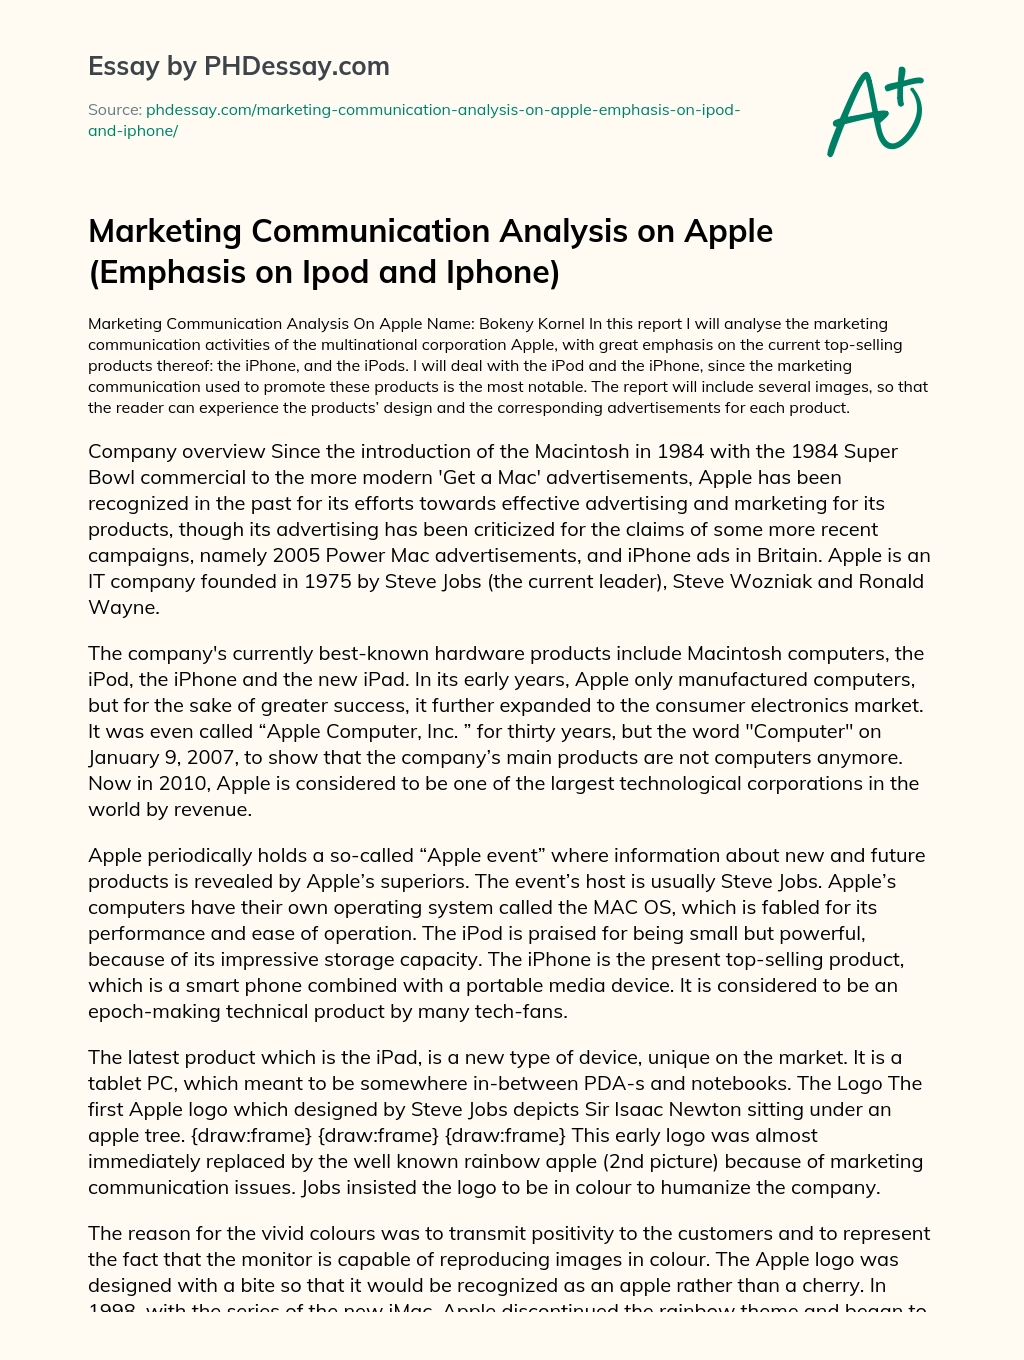 Marketing Communication Analysis on Apple (Emphasis on Ipod and Iphone) essay